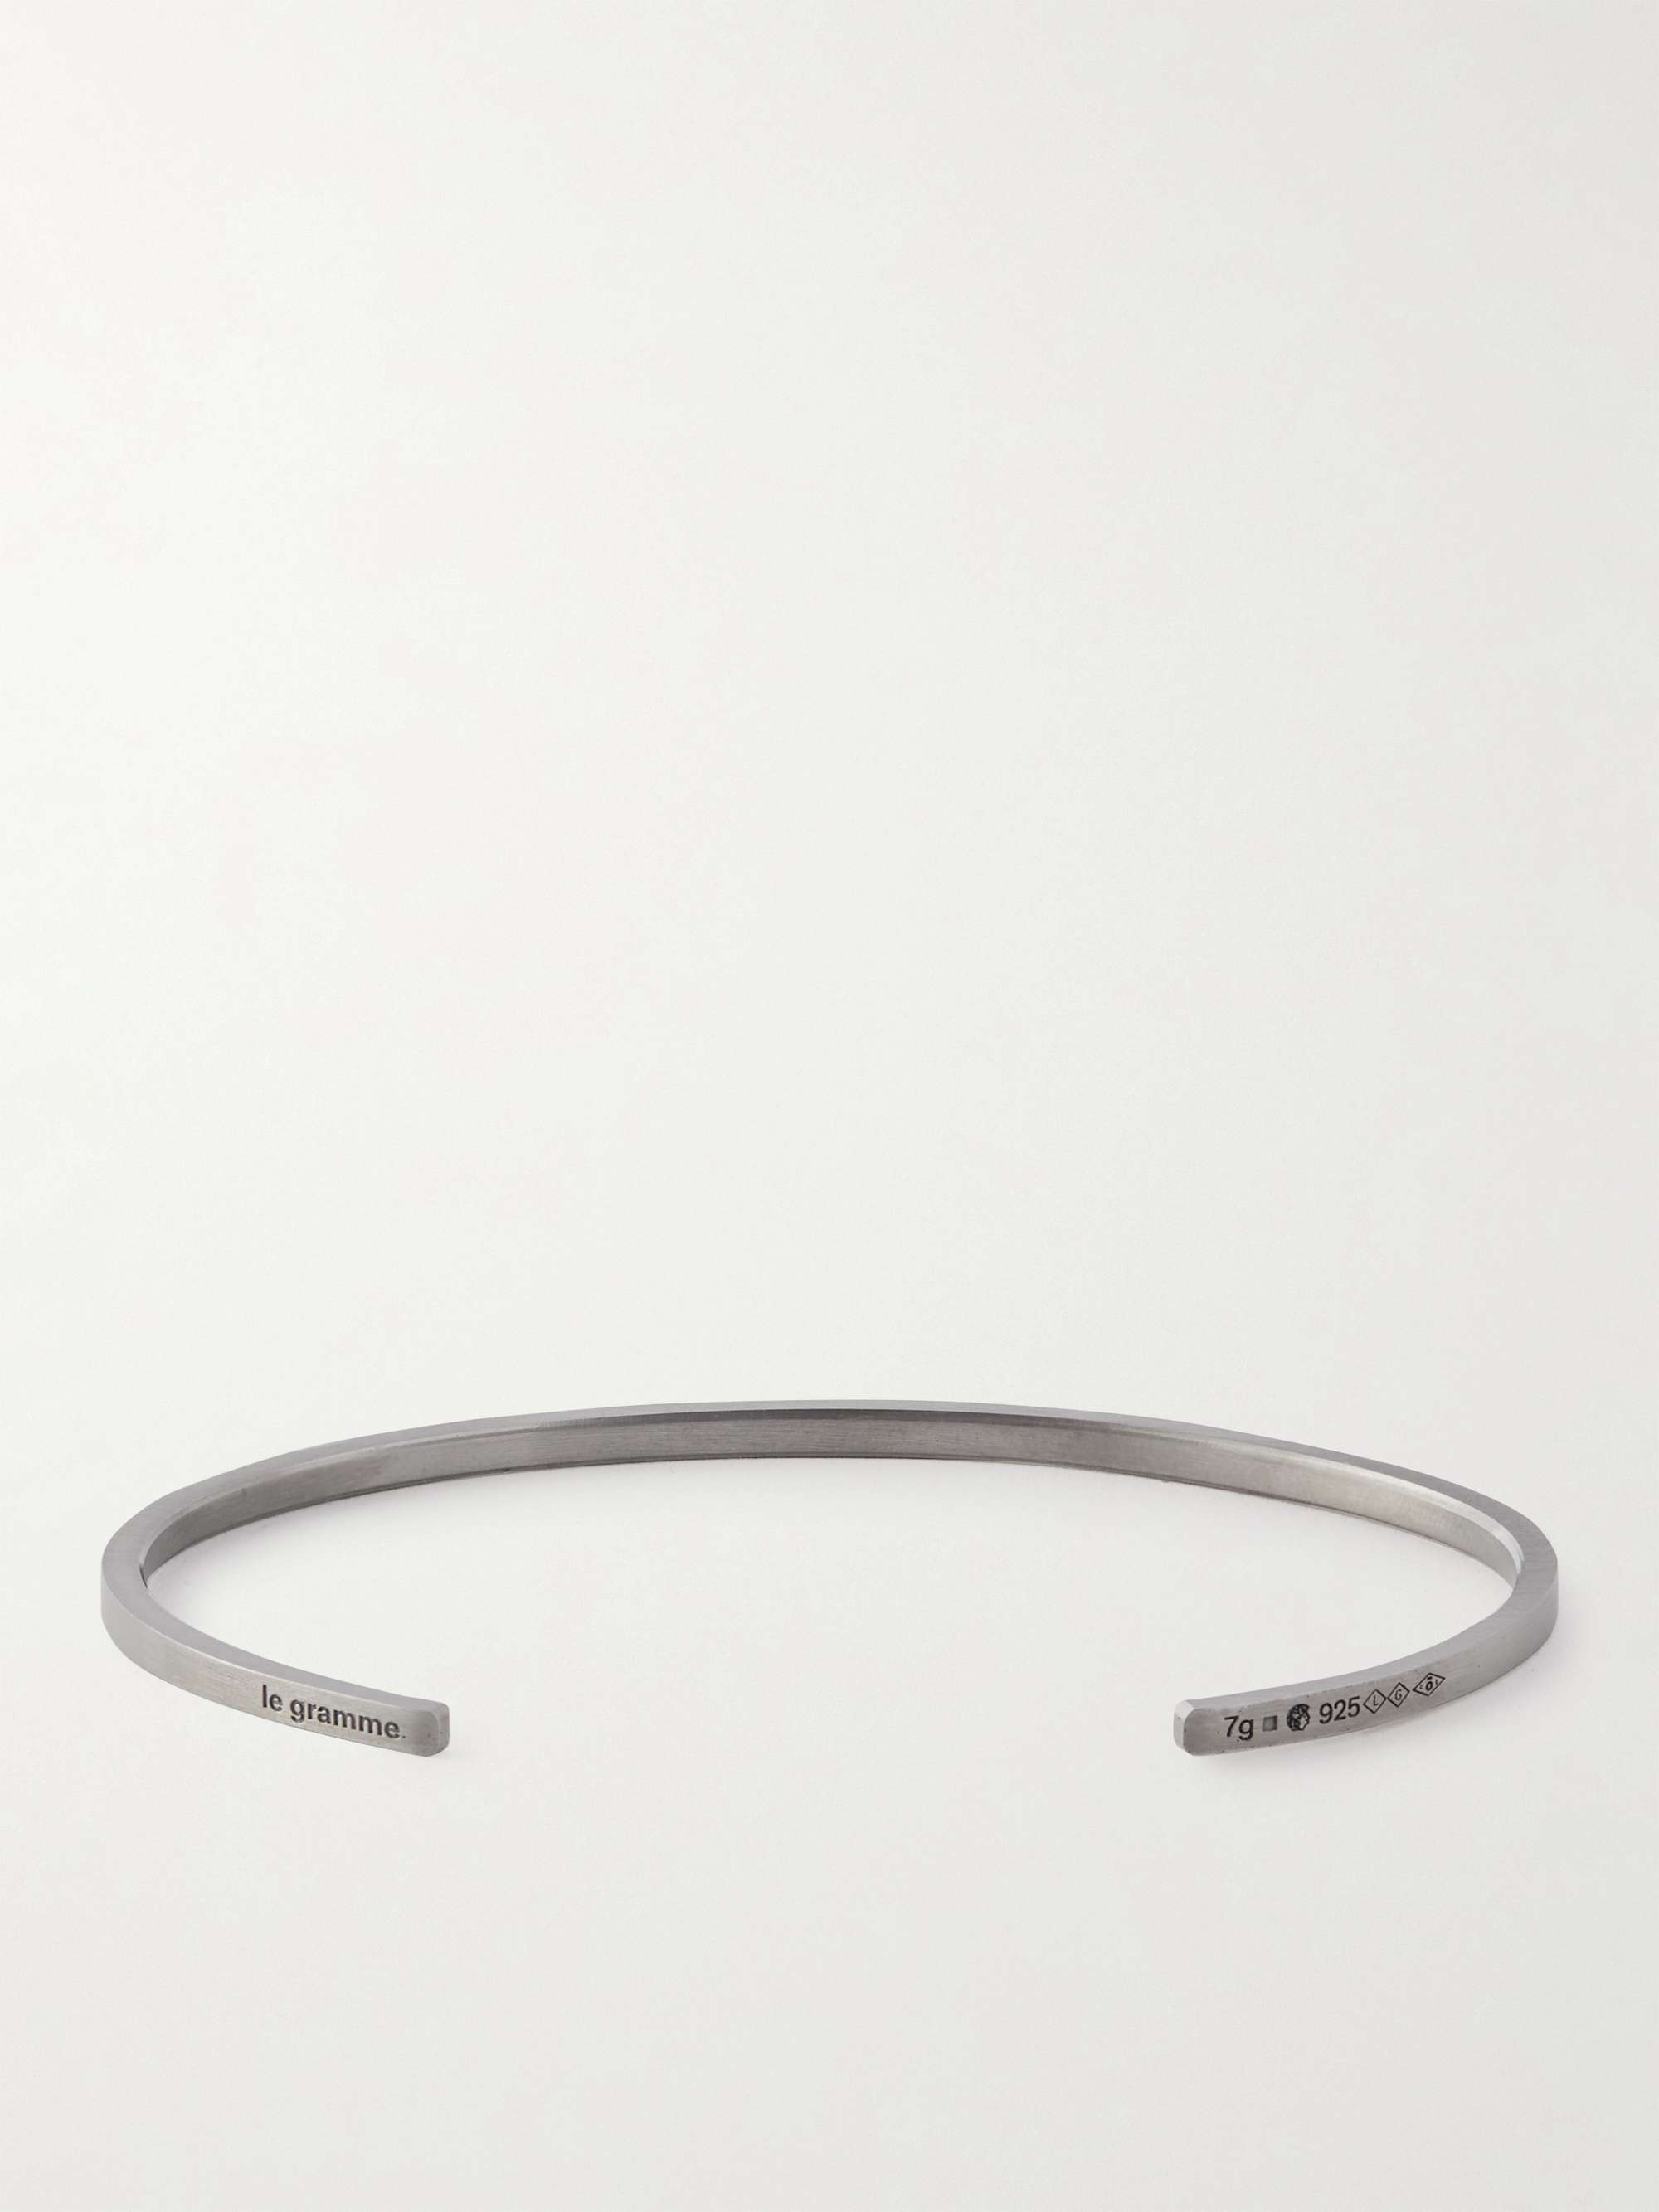 LE GRAMME 7g Brushed Ruthenium-Plated Cuff